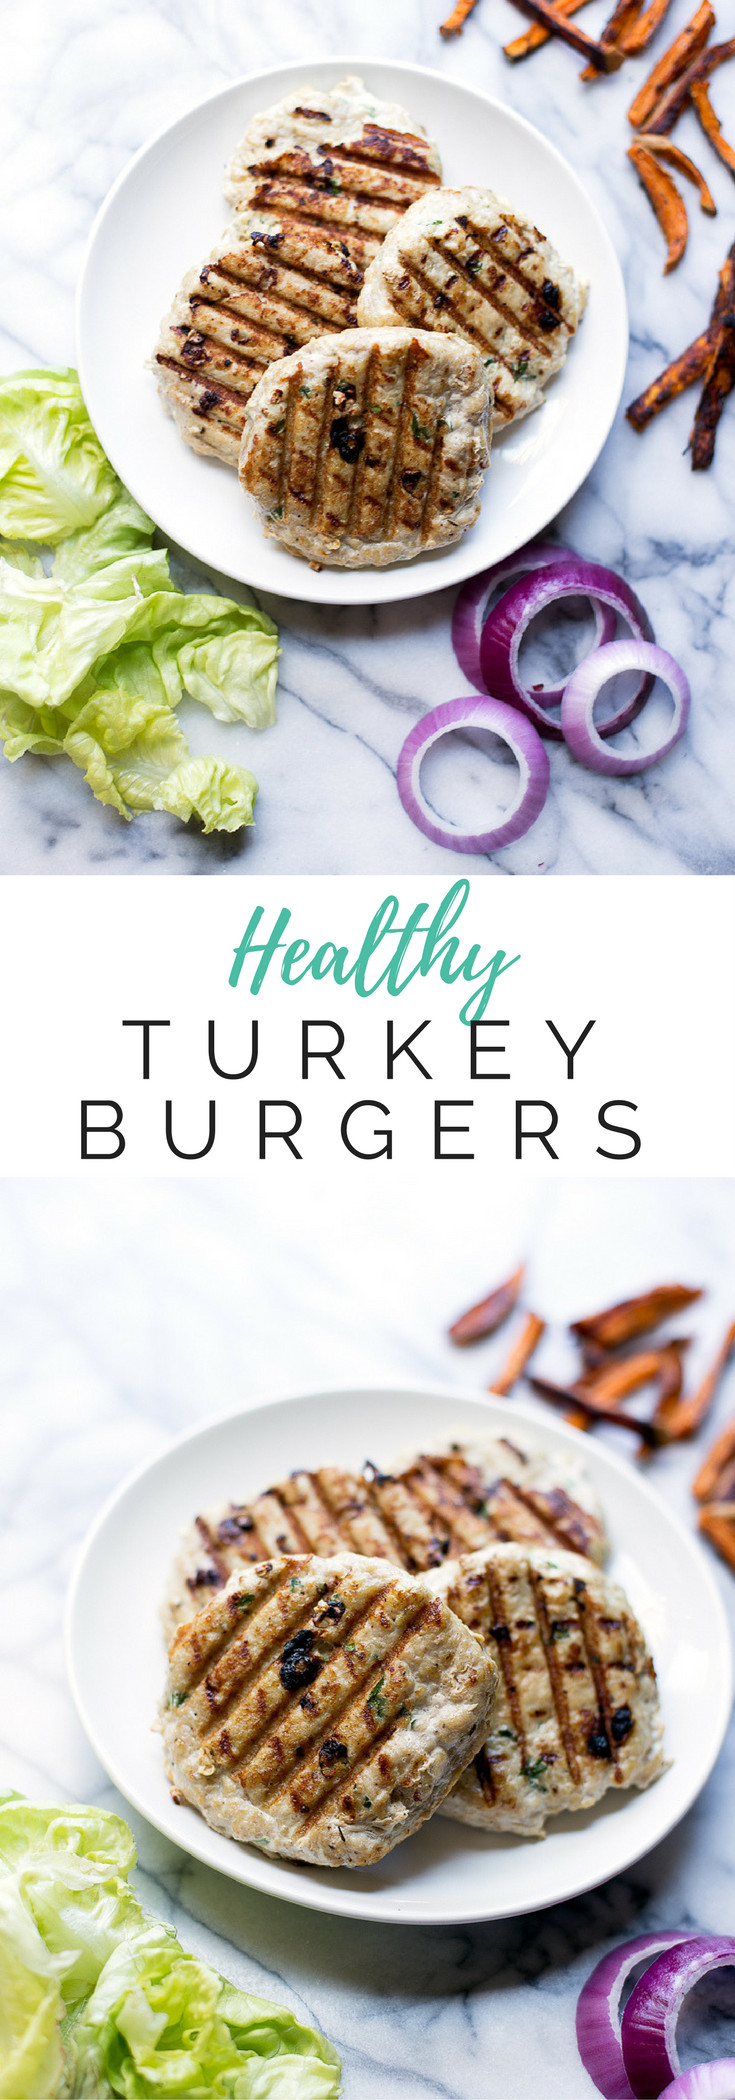 Healthy Side Dishes For Burgers
 Healthy Turkey Burgers Recipe